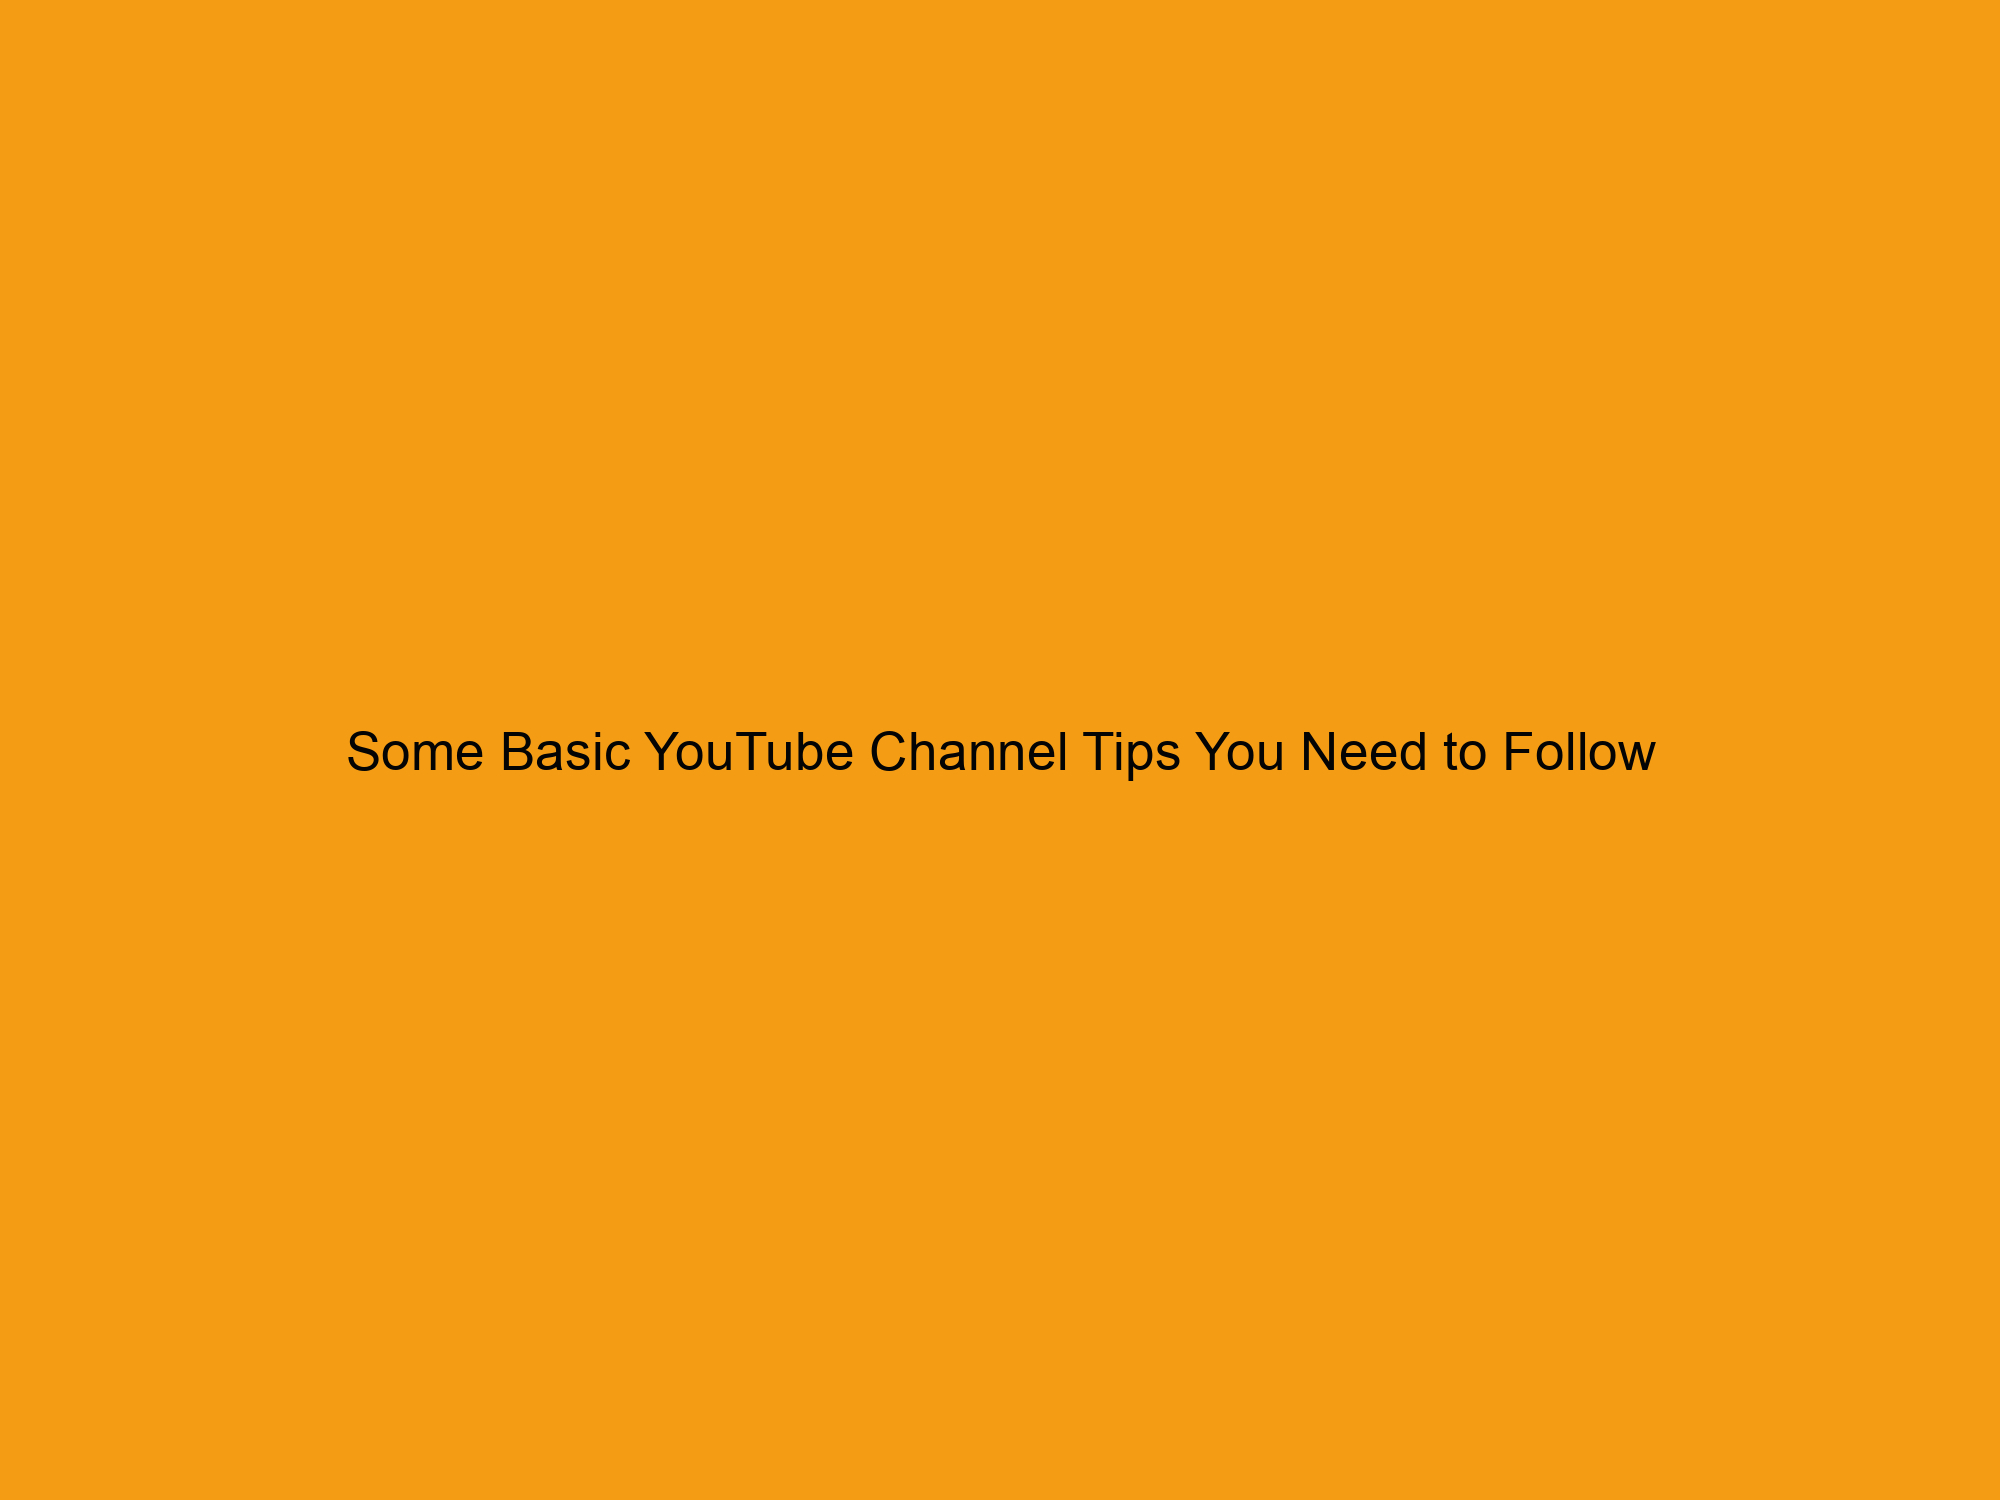 Some Basic YouTube Channel Tips You Need to Follow